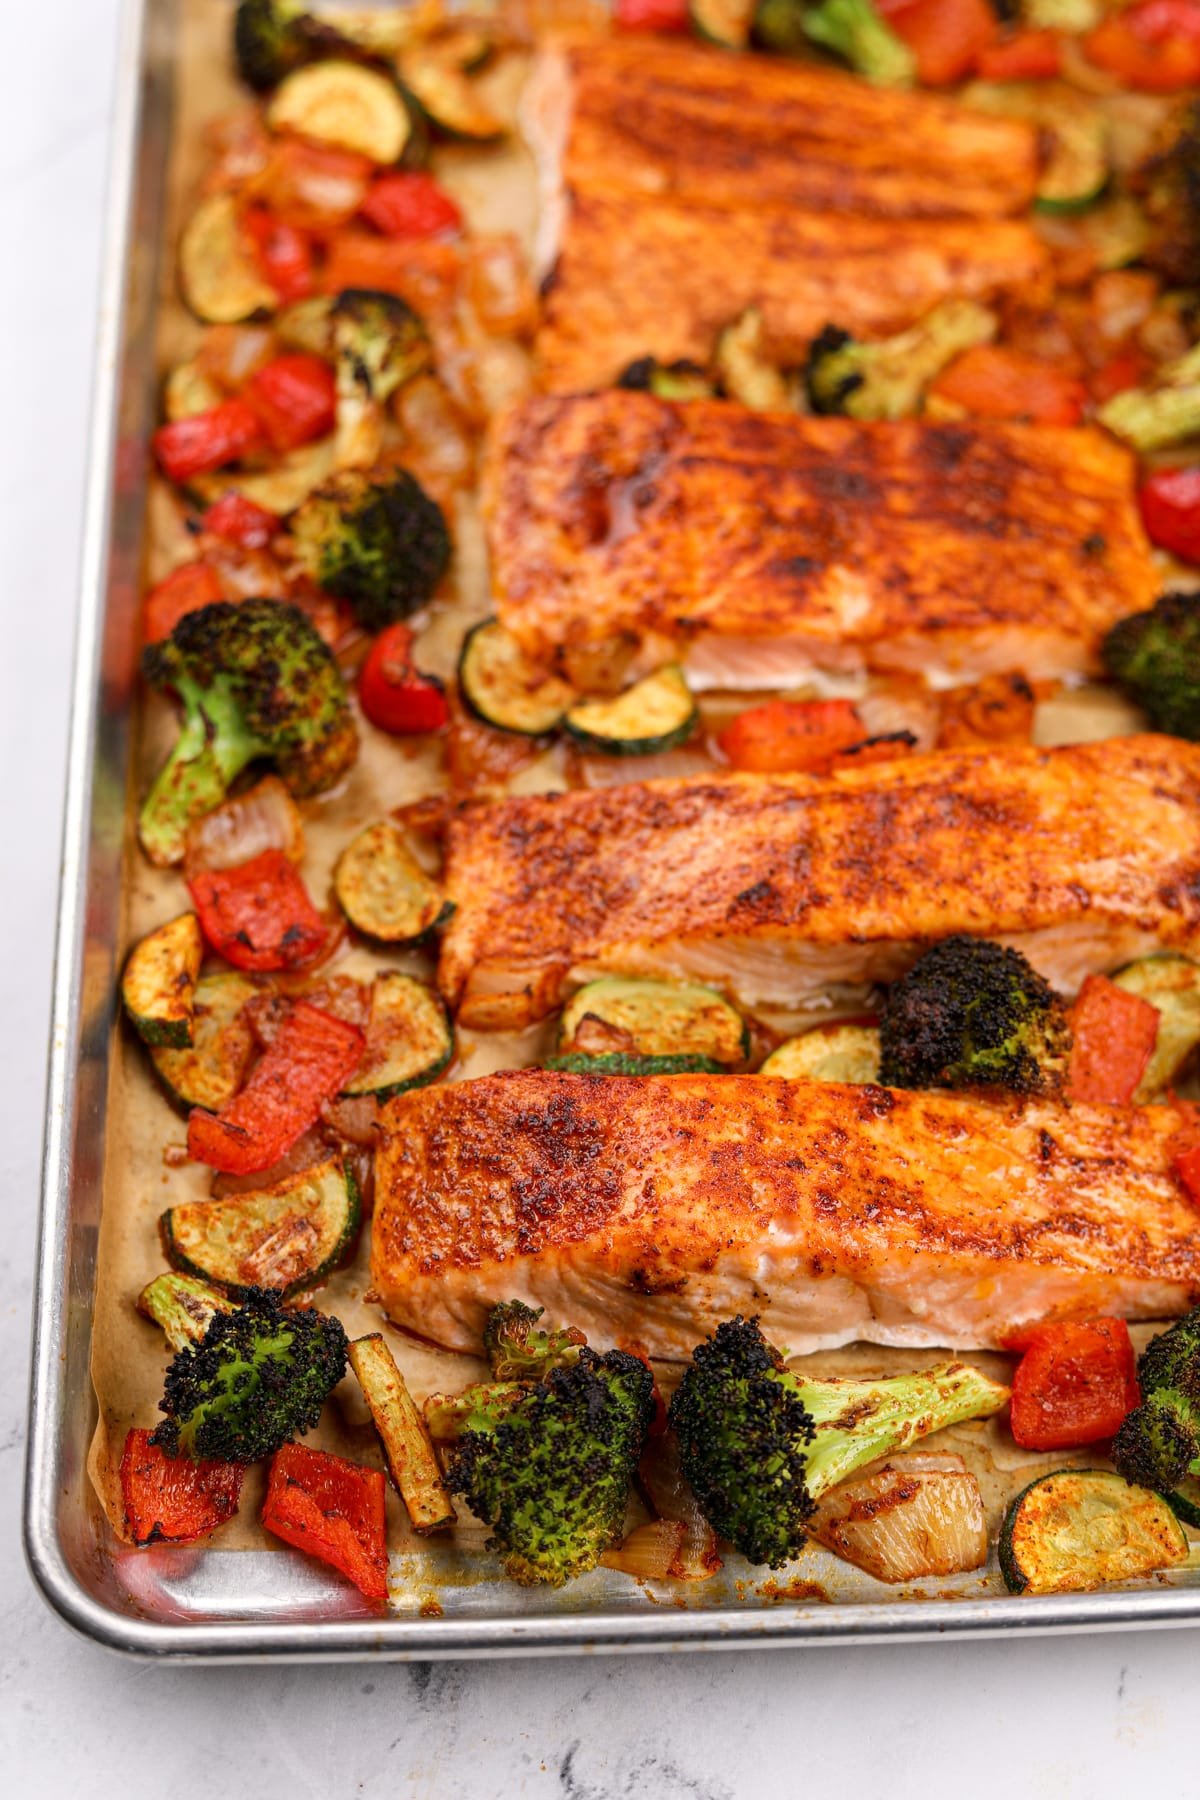 A sheet pan filled with roasted vegetables and salmon fillets.